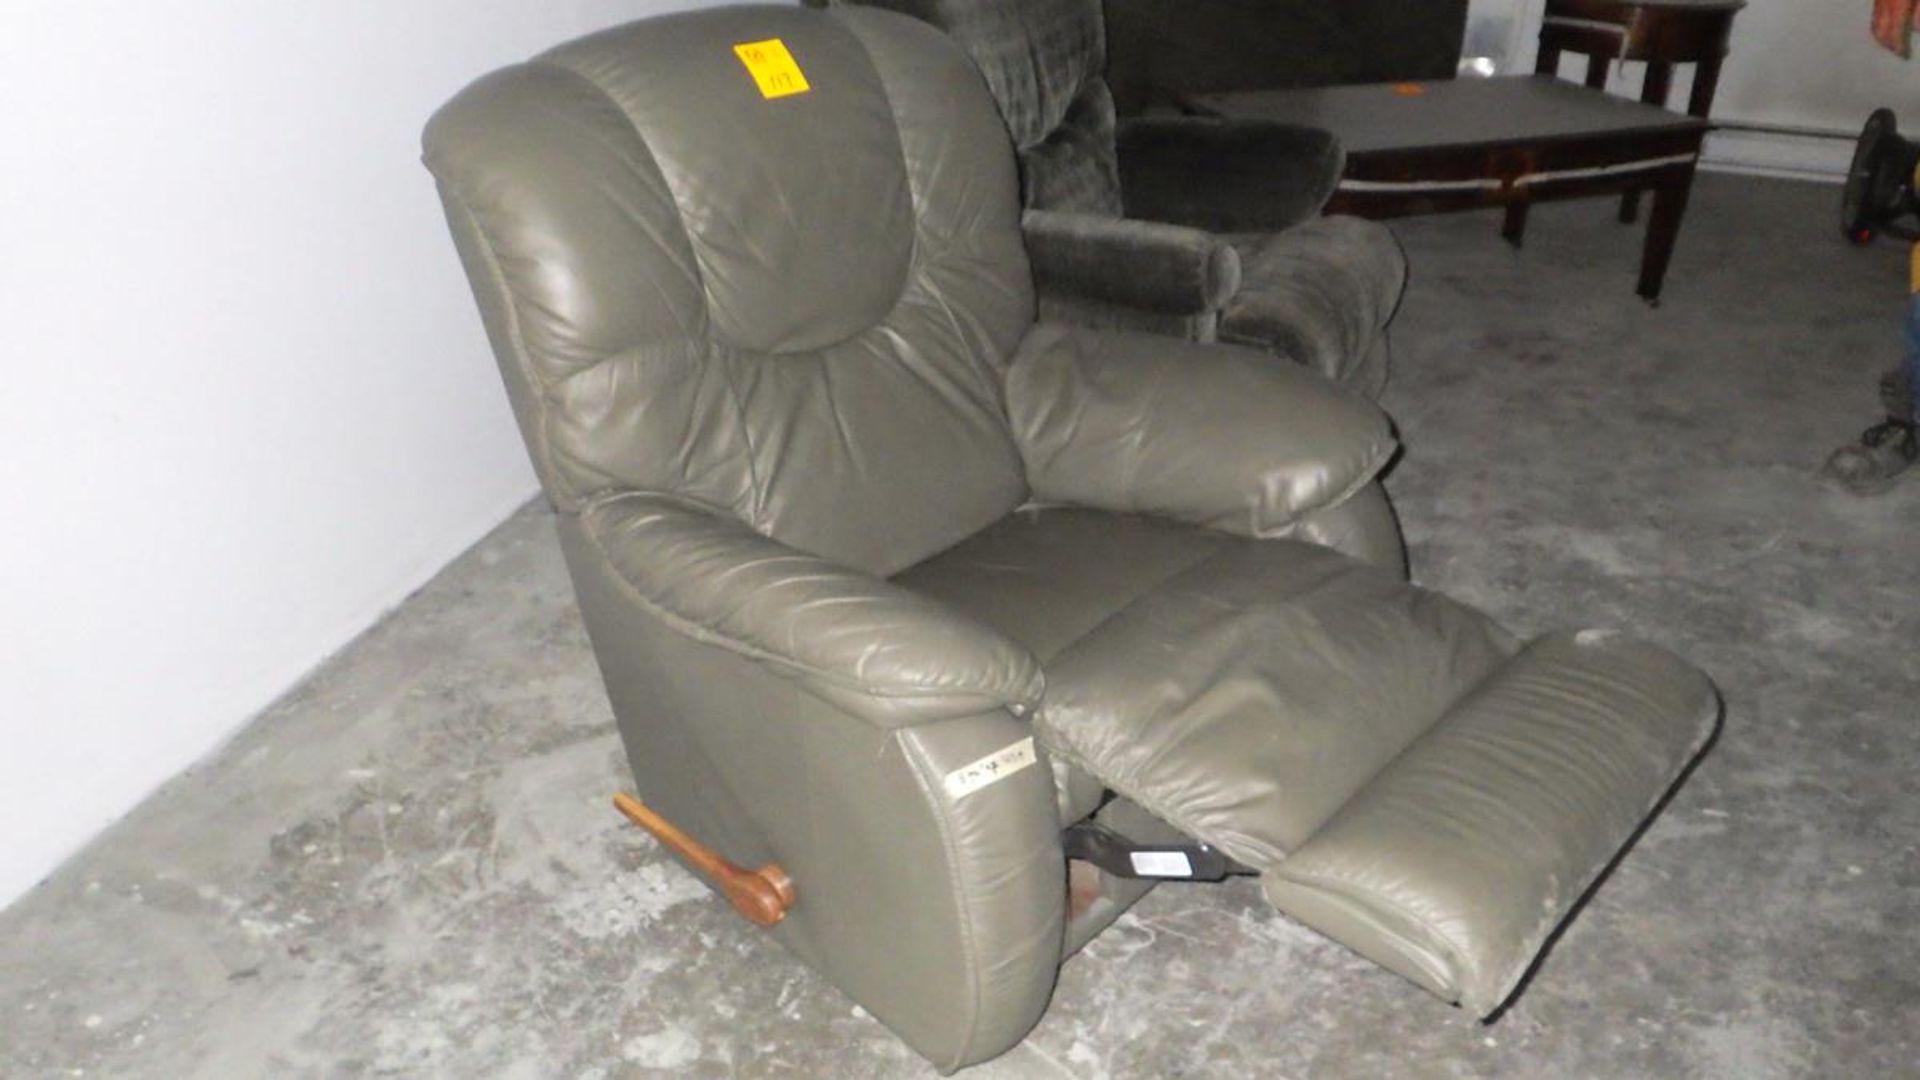 LAZYBOY GREY LEATHER ROCKER RECLINER IN GOOD CONDITION - Image 2 of 2